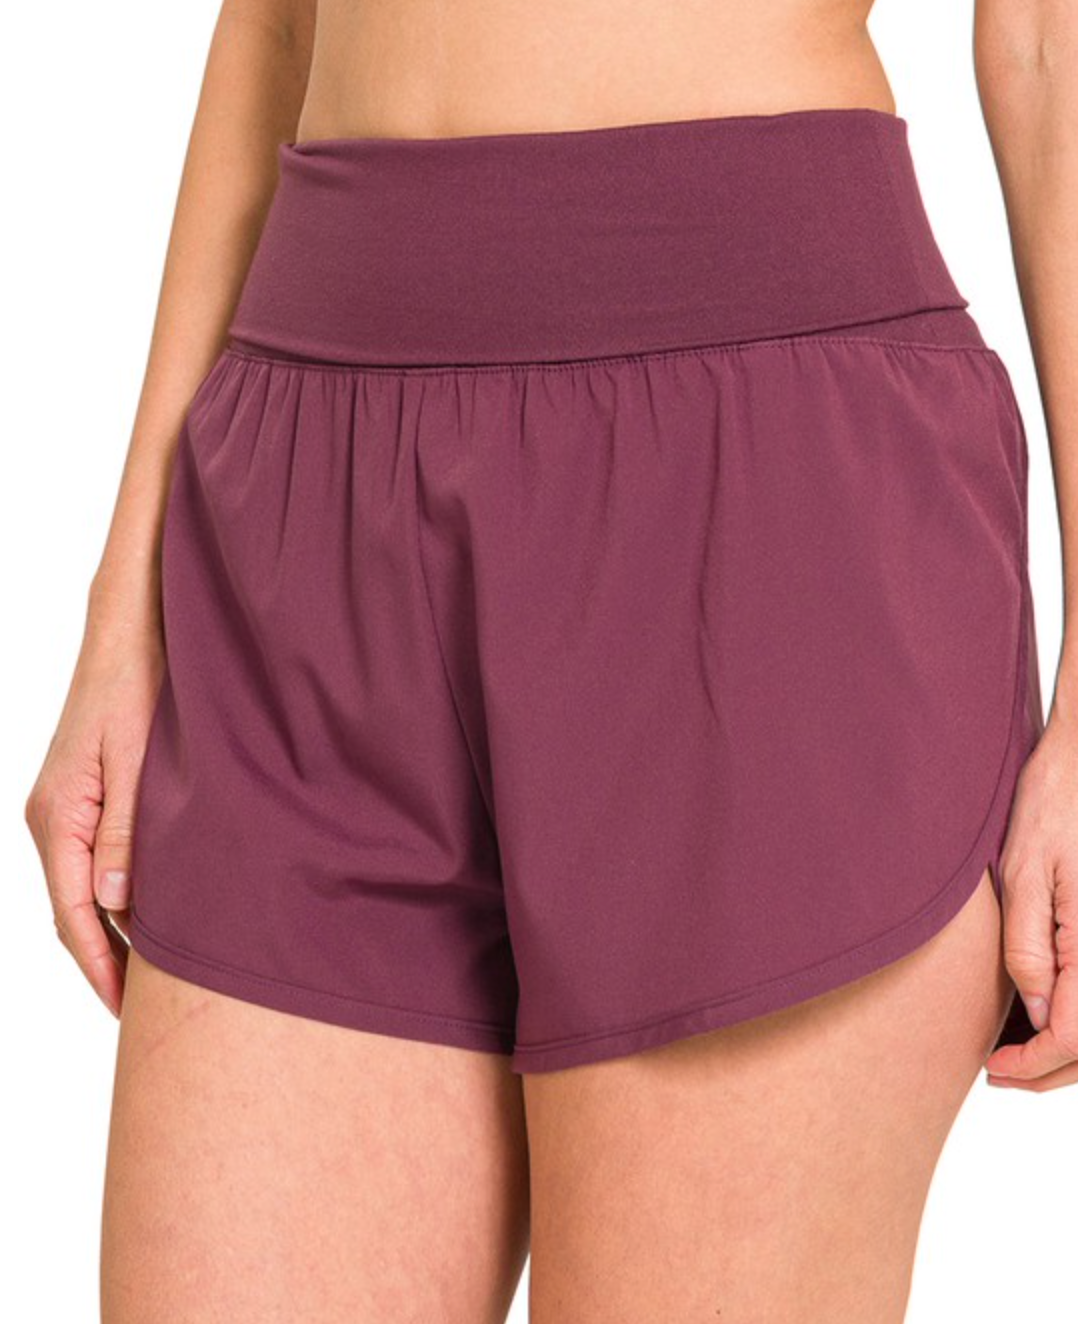 Purple - Athletic Shorts-120 BOTTOMS-Zenana-Adelyn Elaine's Boutique, Women's Clothing Boutique in Gilmer, TX